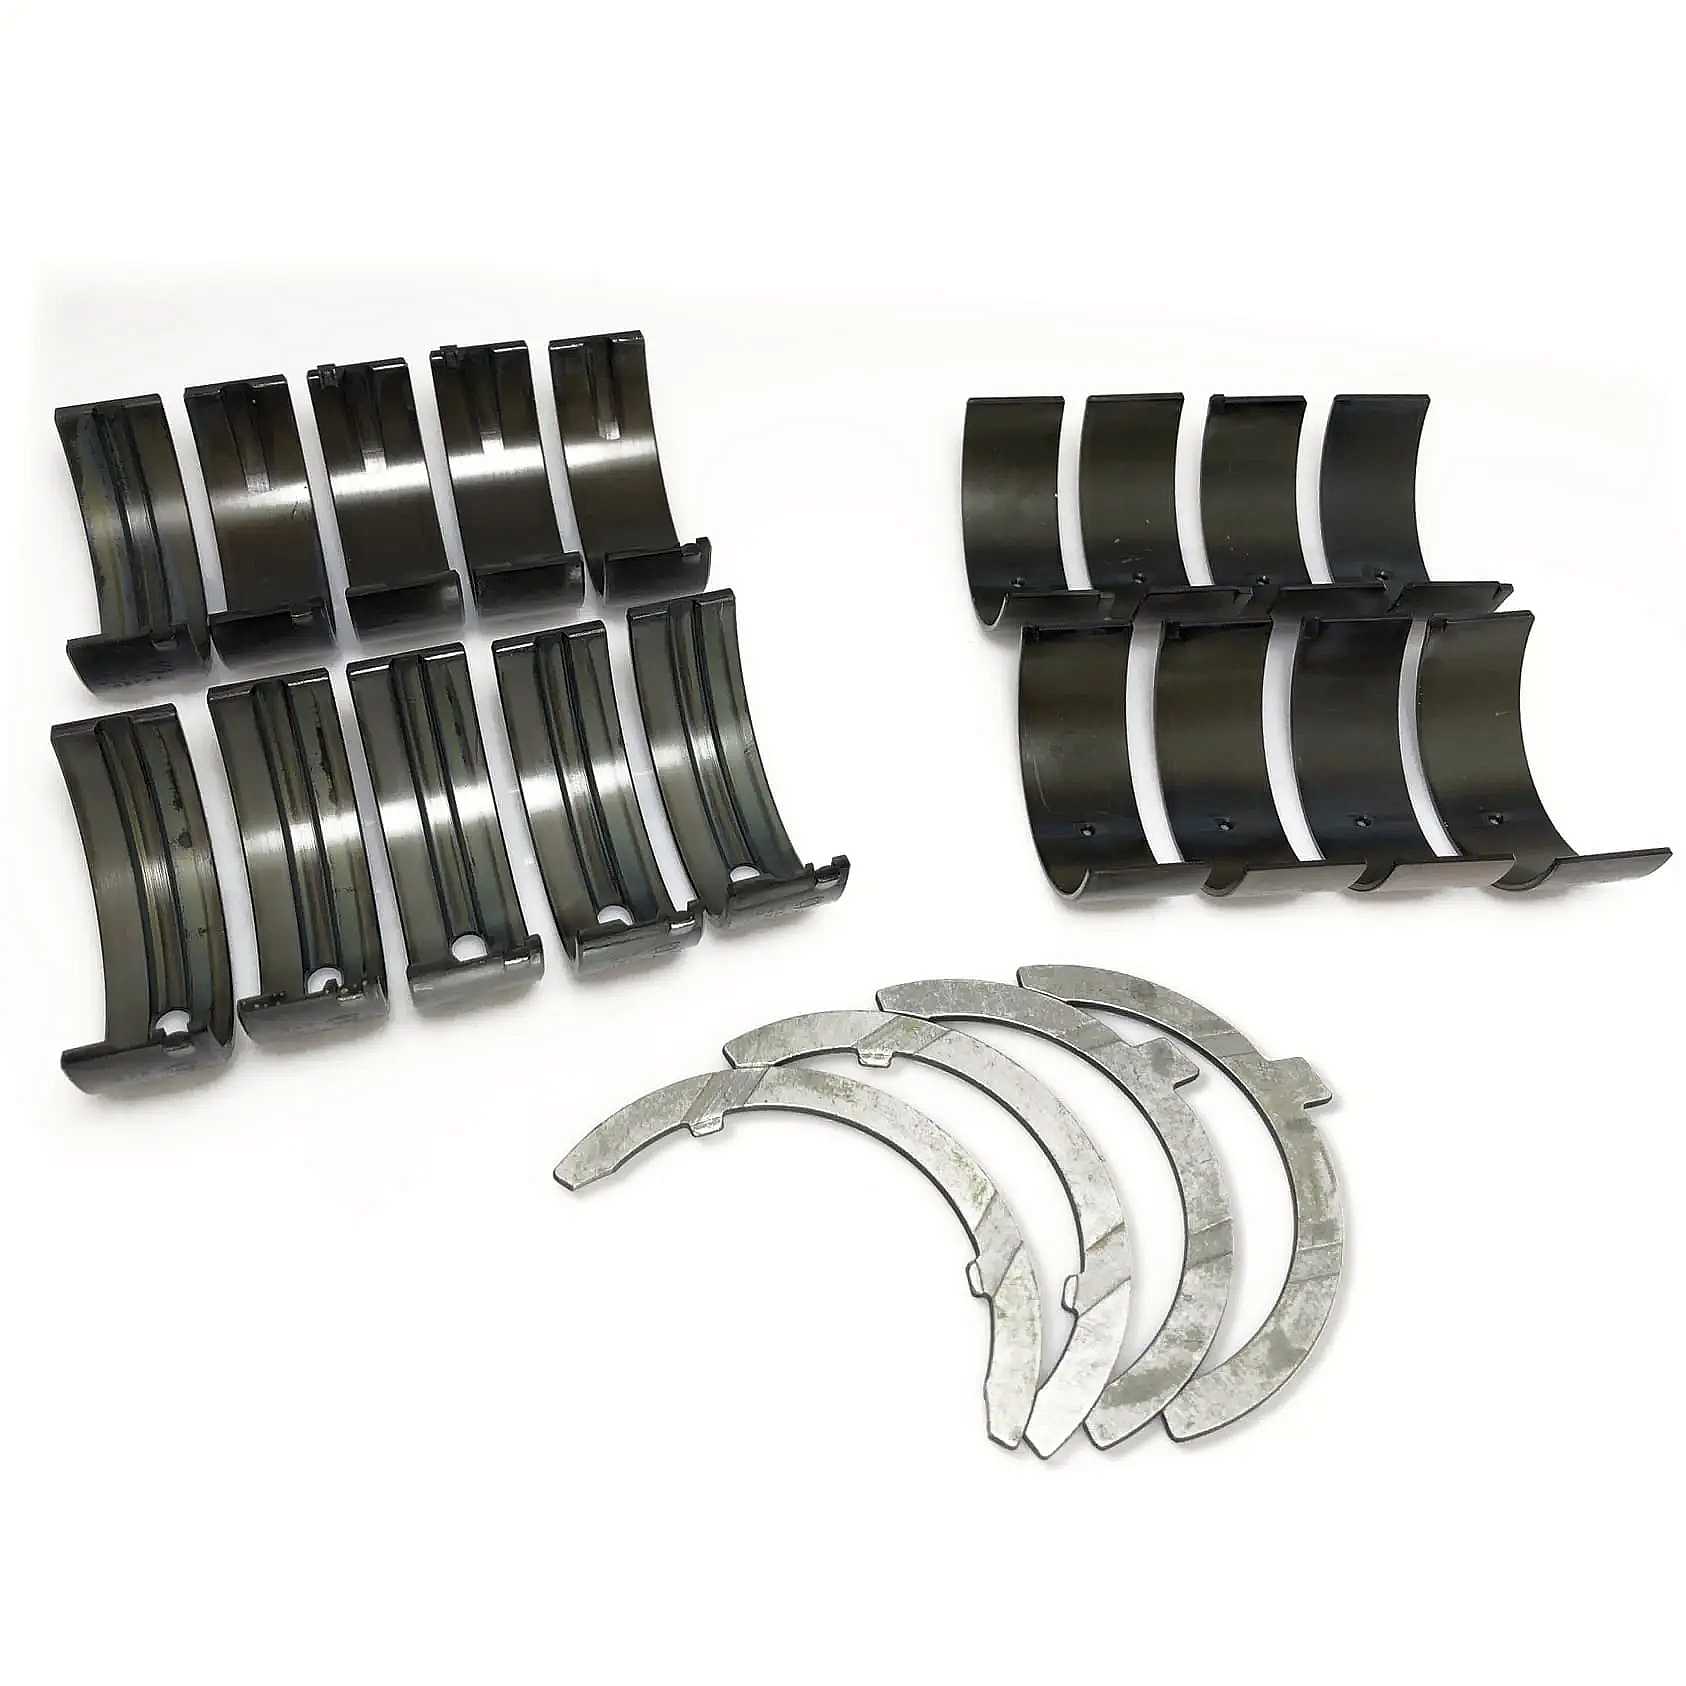 ACL Race bearing Kit for 1.8t engines